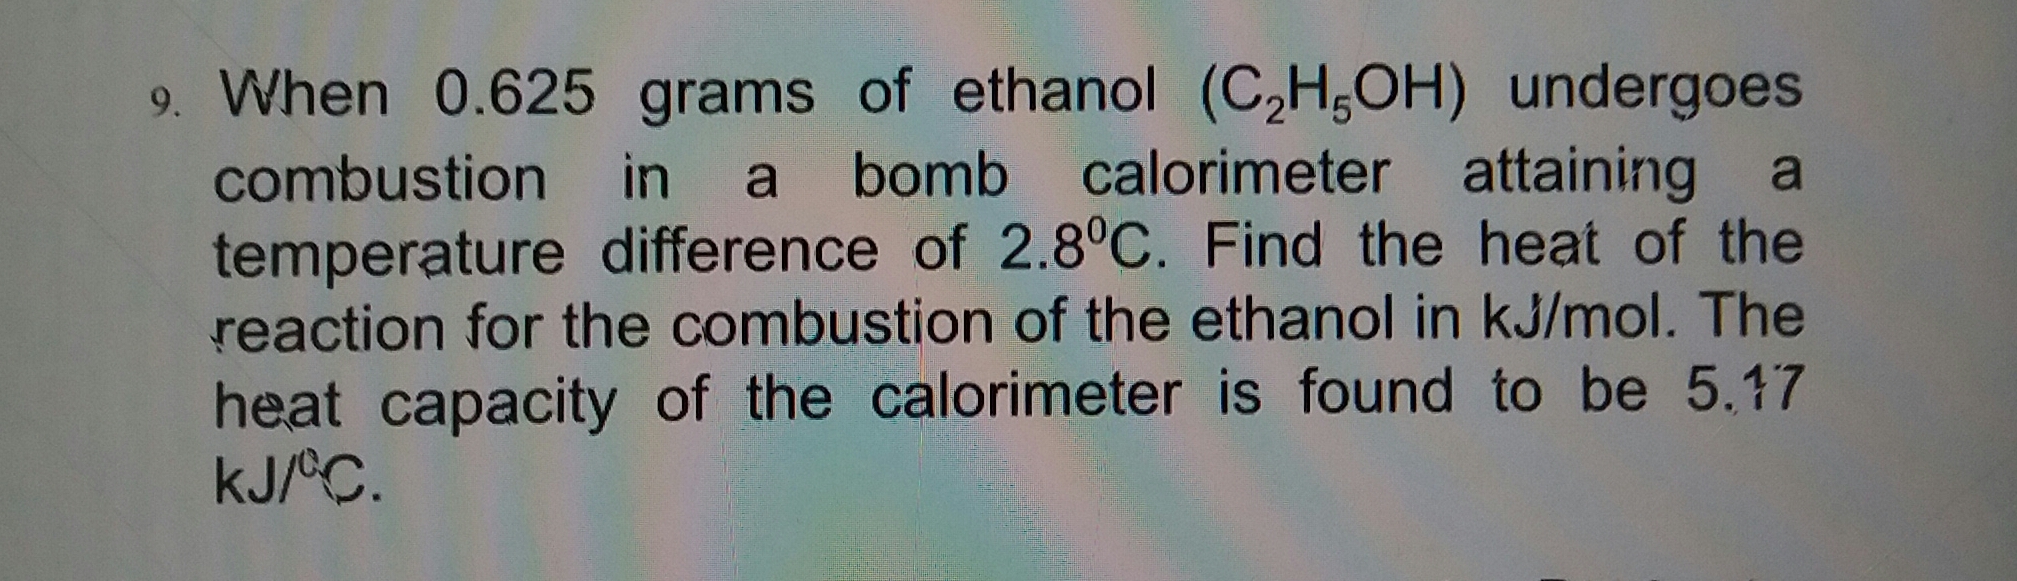 what is the heat capacity of ethanol